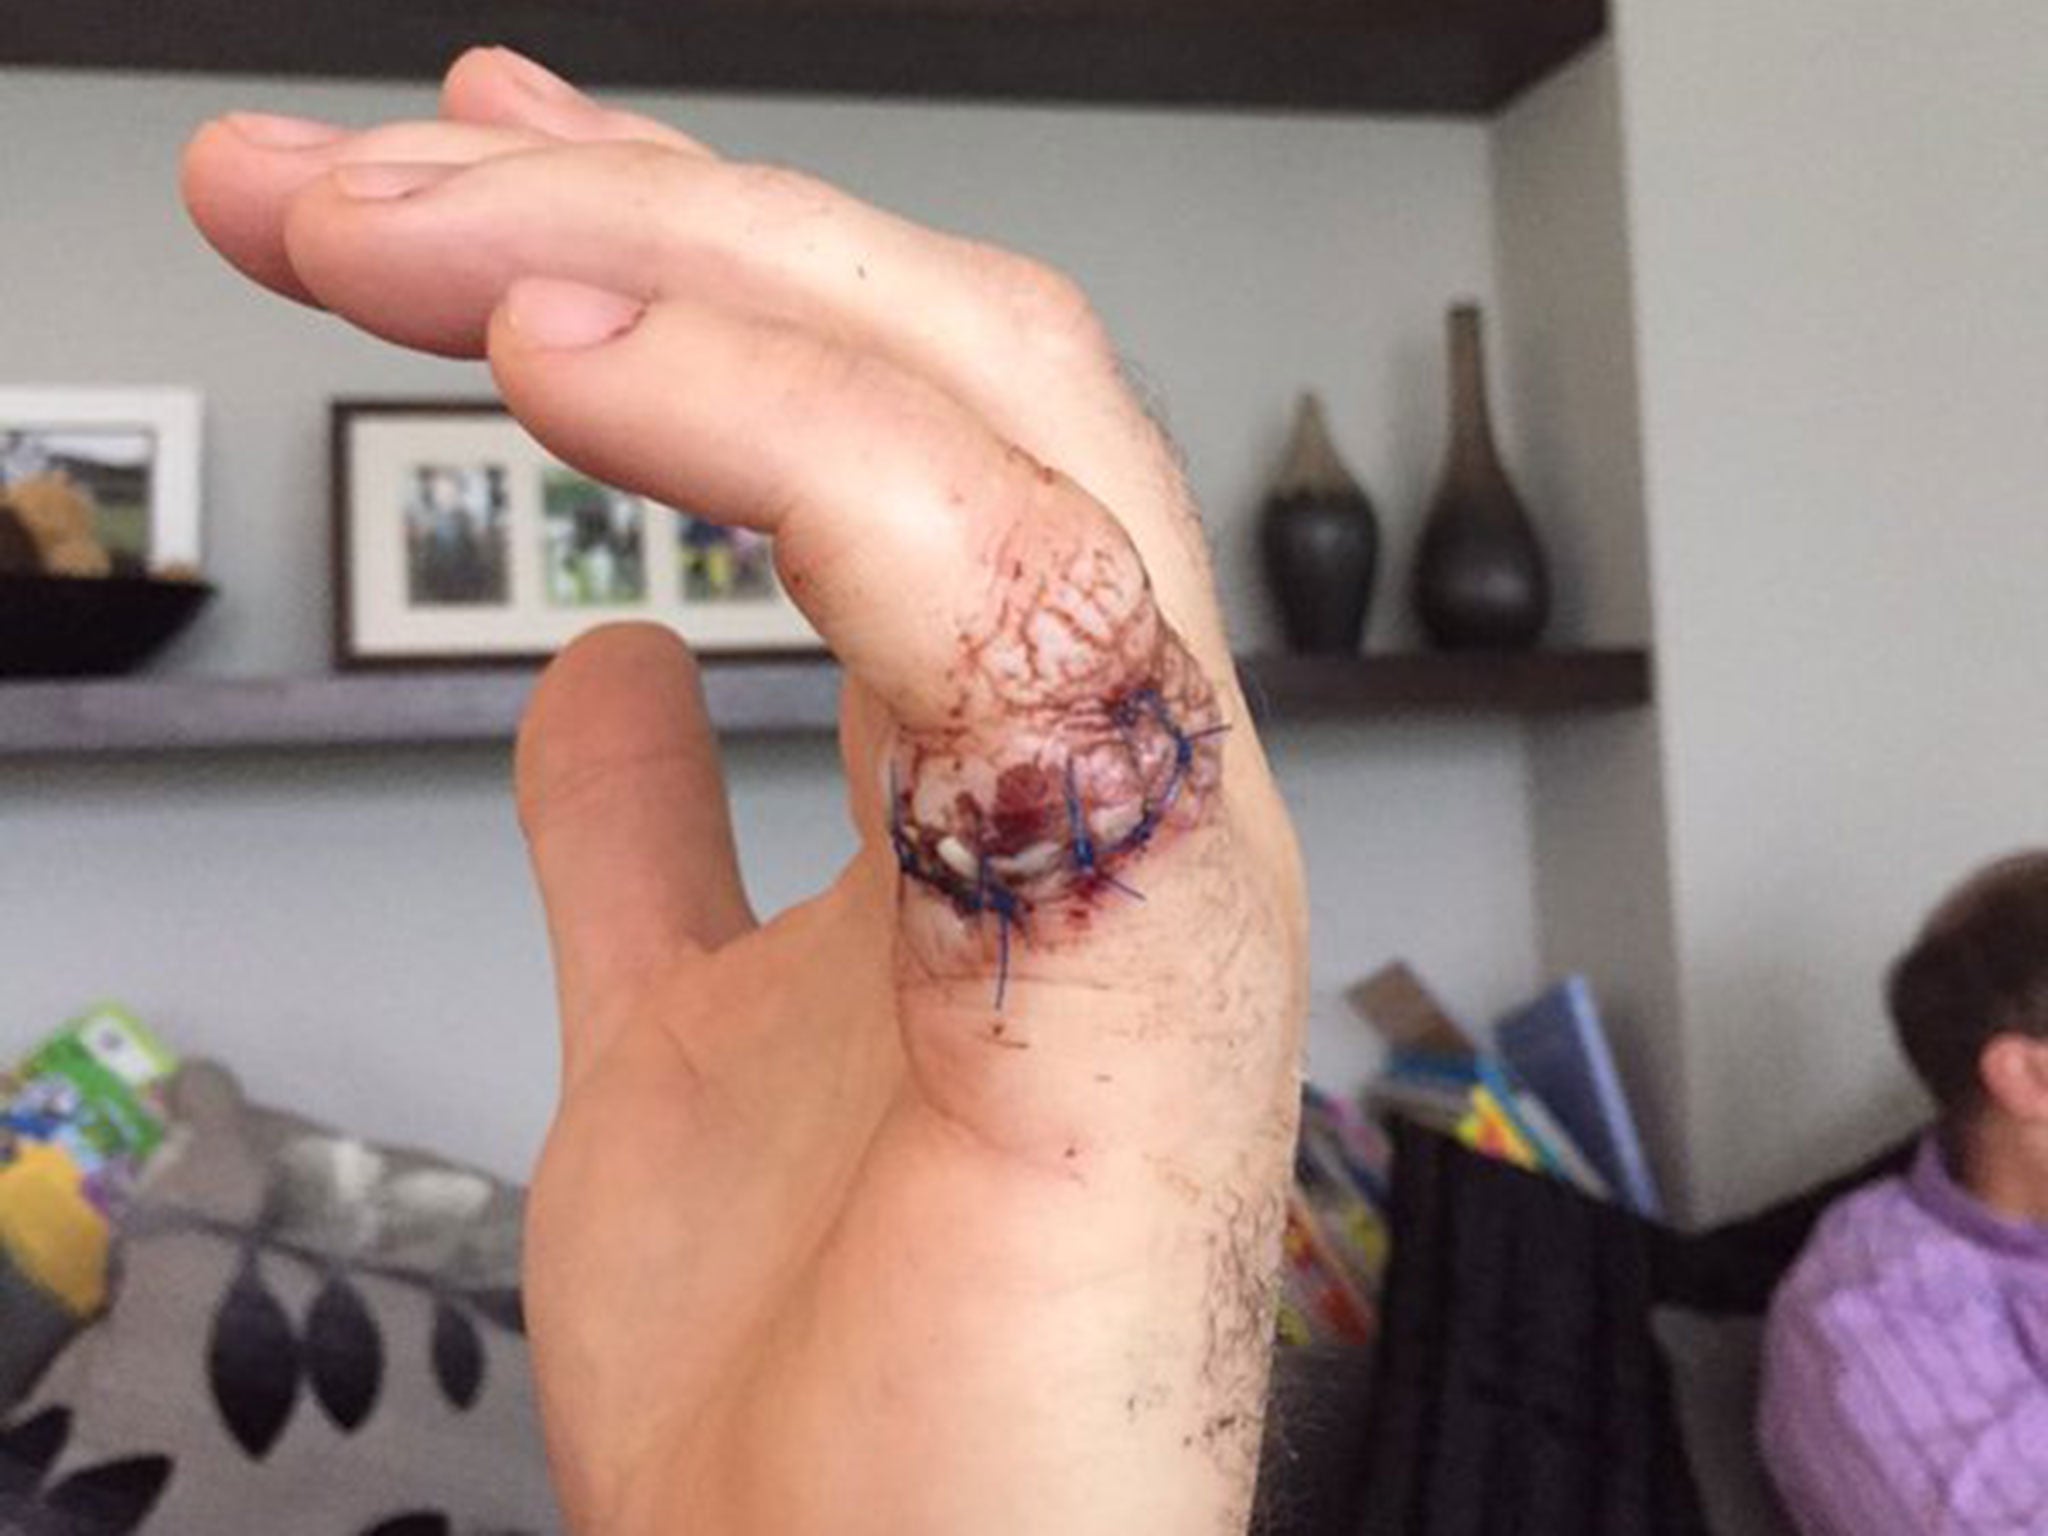 Jamie Donaldson sliced open his finger in a chainsaw accident